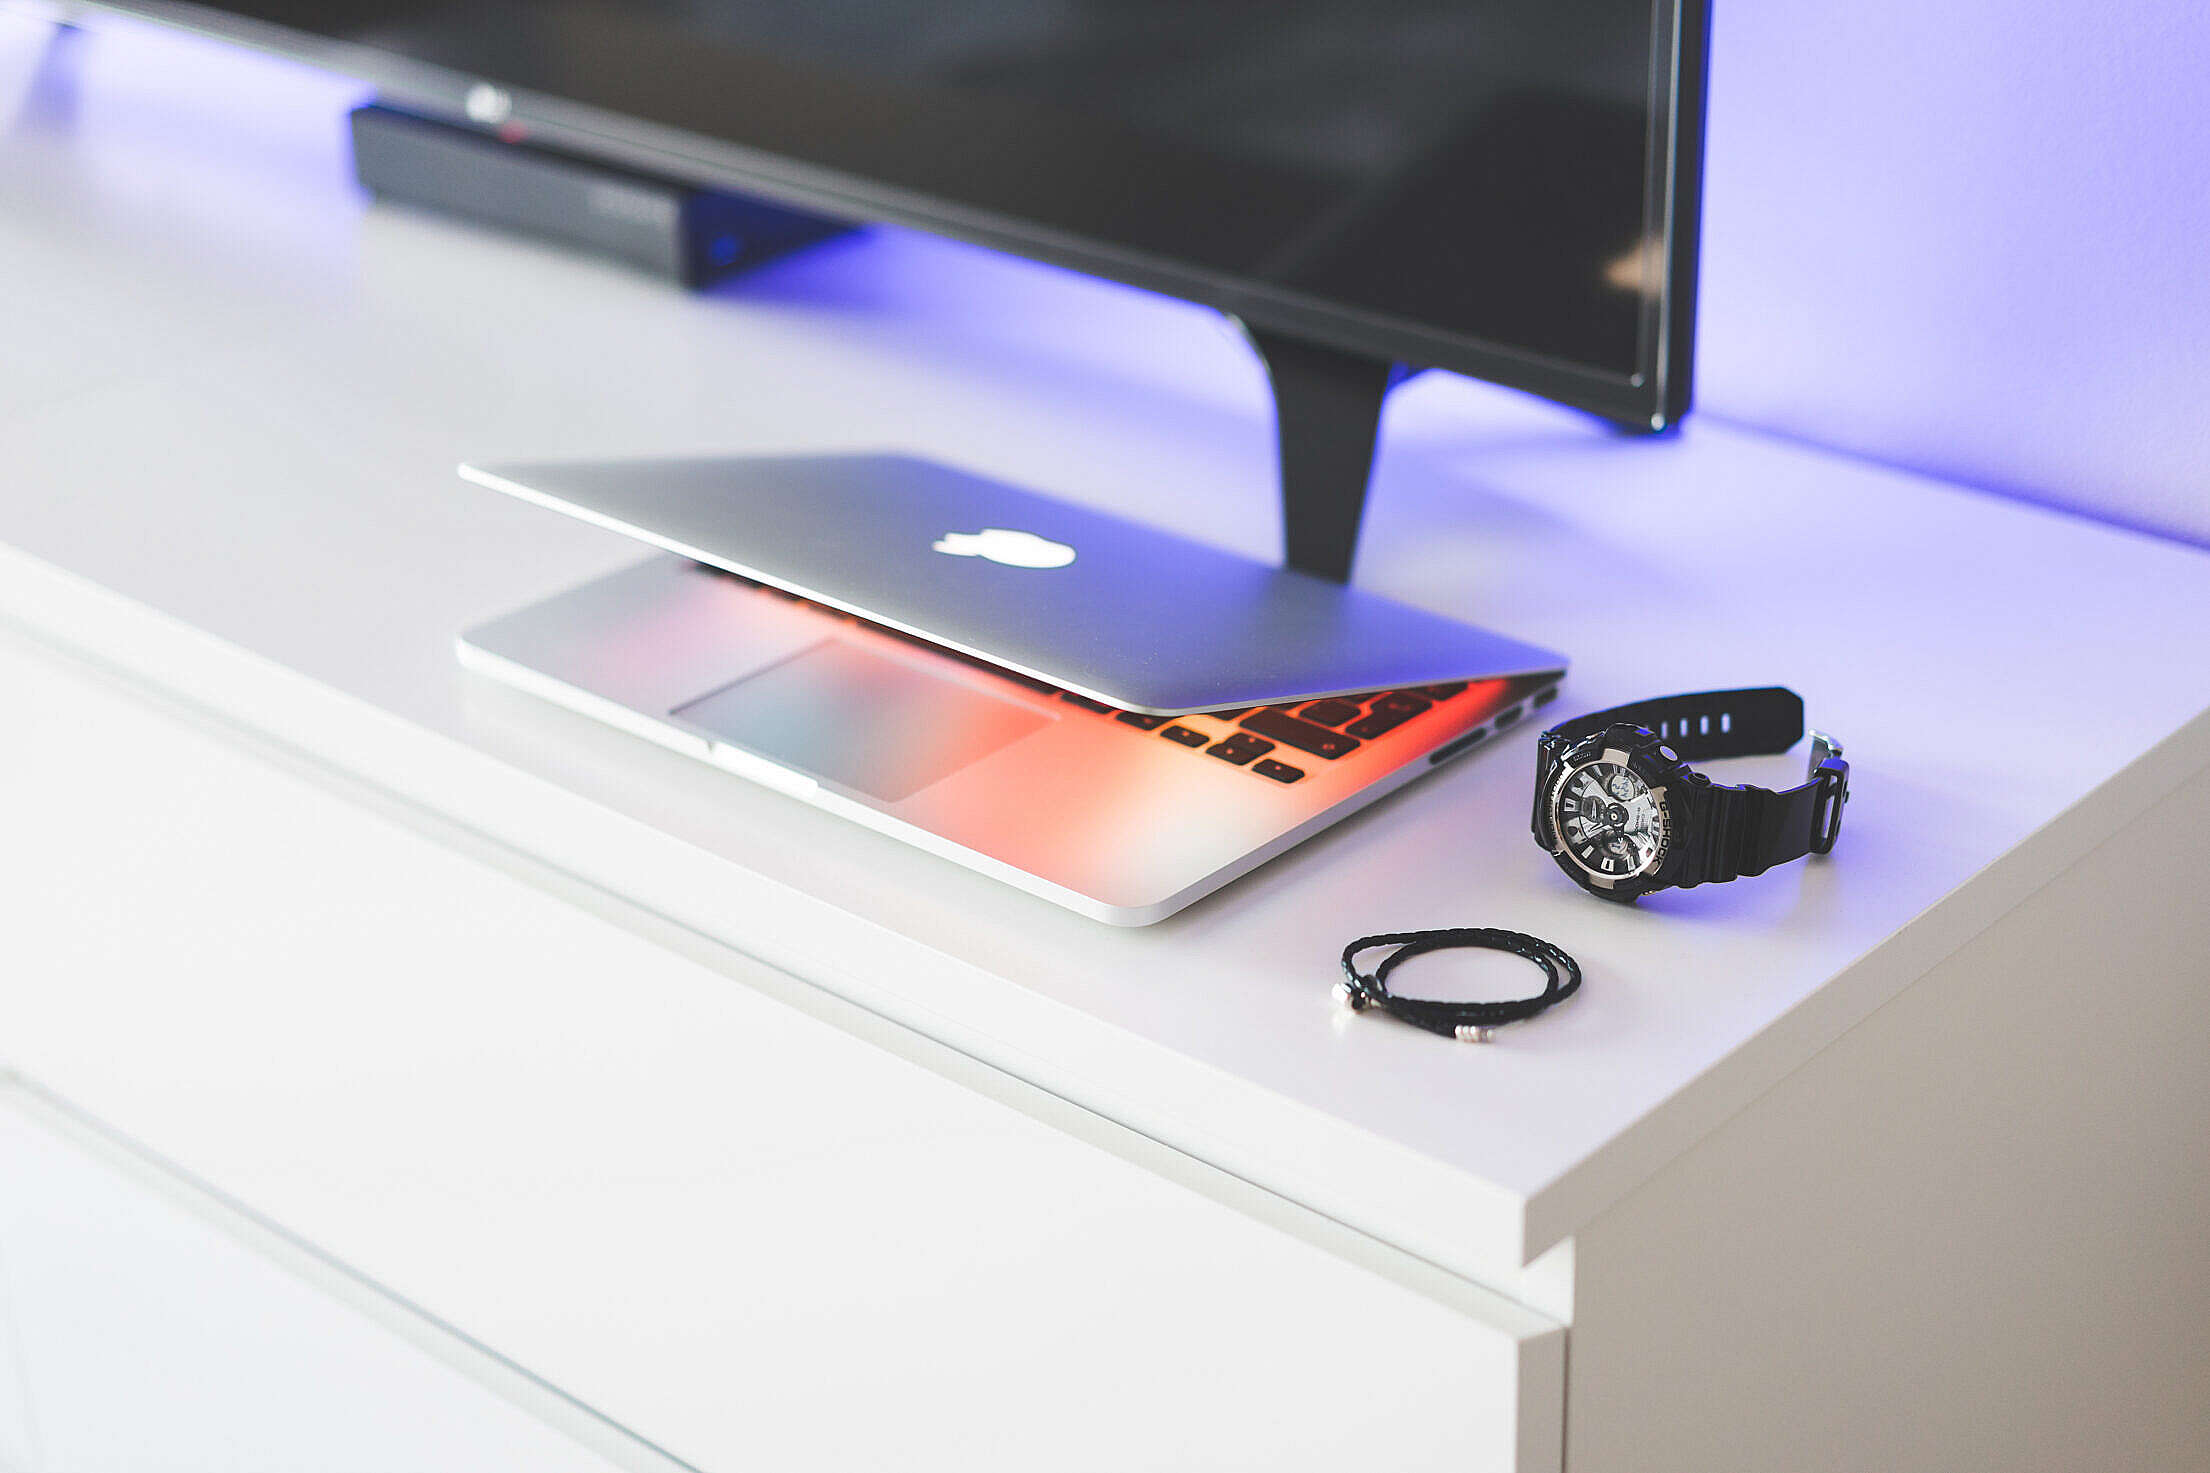 Modern Laptop and Watches Free Stock Photo